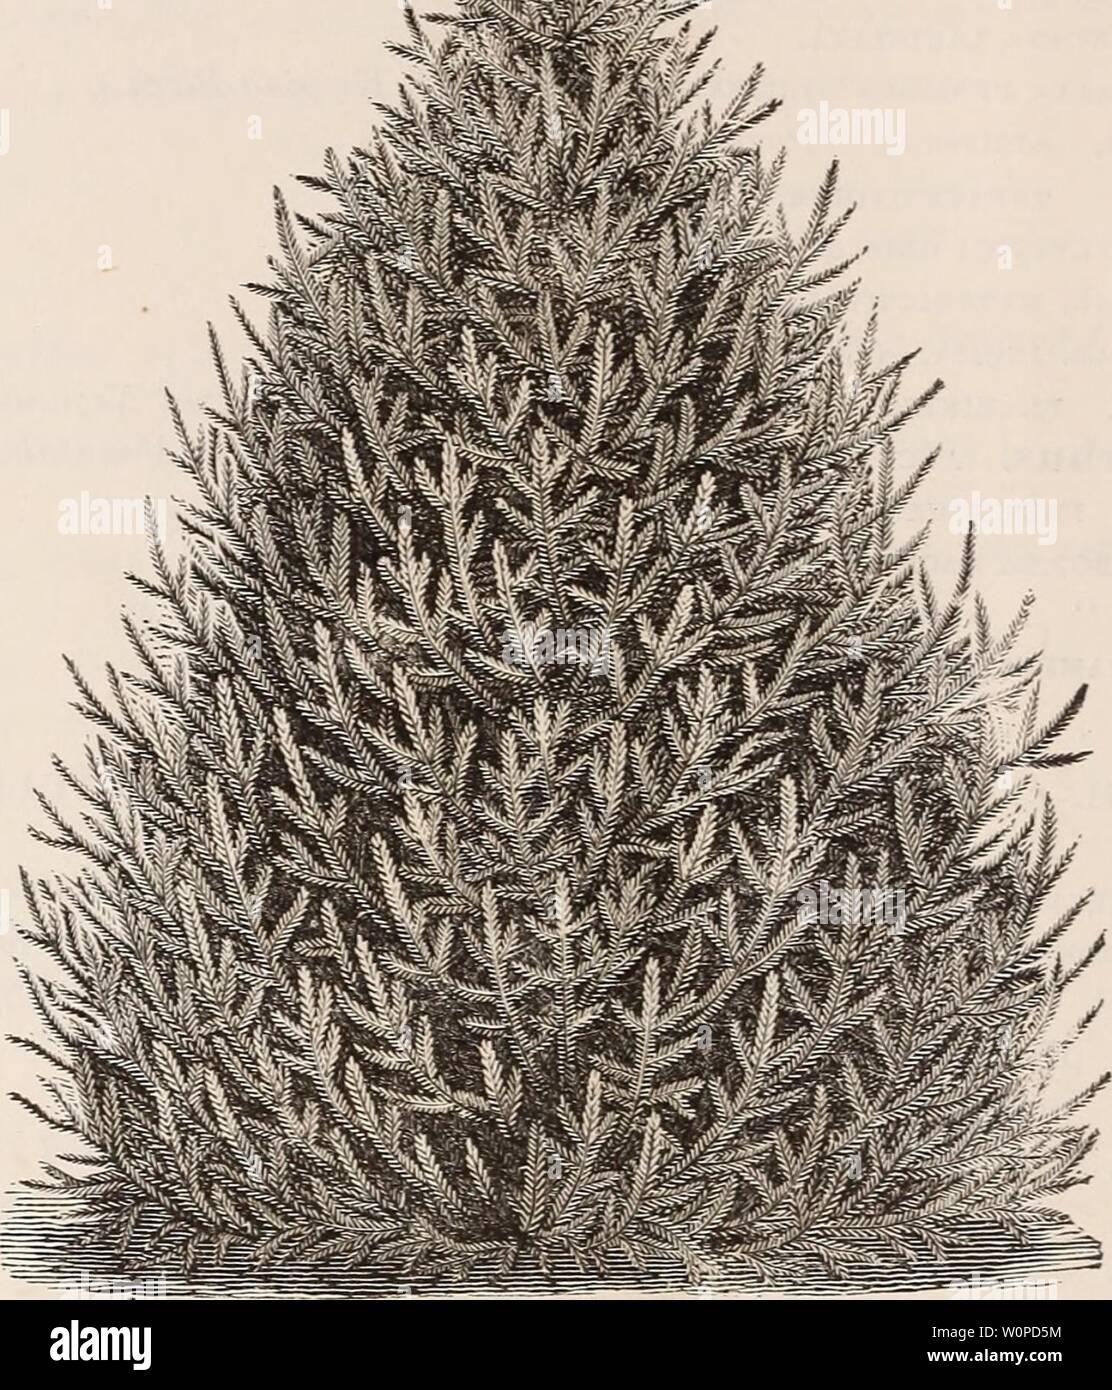 Archive image from page 45 of Descriptive catalogue of ornamental trees,. Descriptive catalogue of ornamental trees, shrubs, roses, flowering plants, &c descriptivecatal1875ellw Year: 1875  ABIES ALBA. ('White Spruce.) CLASS IV.—CONIFER/E. (Evergreens.) Price.—60 cts. each [except otherwise noted,] for trees of the usual size. Extra sized specimens charged for in proportion. Those preceded by a  are not quite hardy in this section. Thowpreceded by a + are eitJier new or rare, and only to he had of small sizes. ABIES, (including Picea and Tsuga,; Spruce, Fie and Hemlocks. Section 1. Abies. Spru Stock Photo